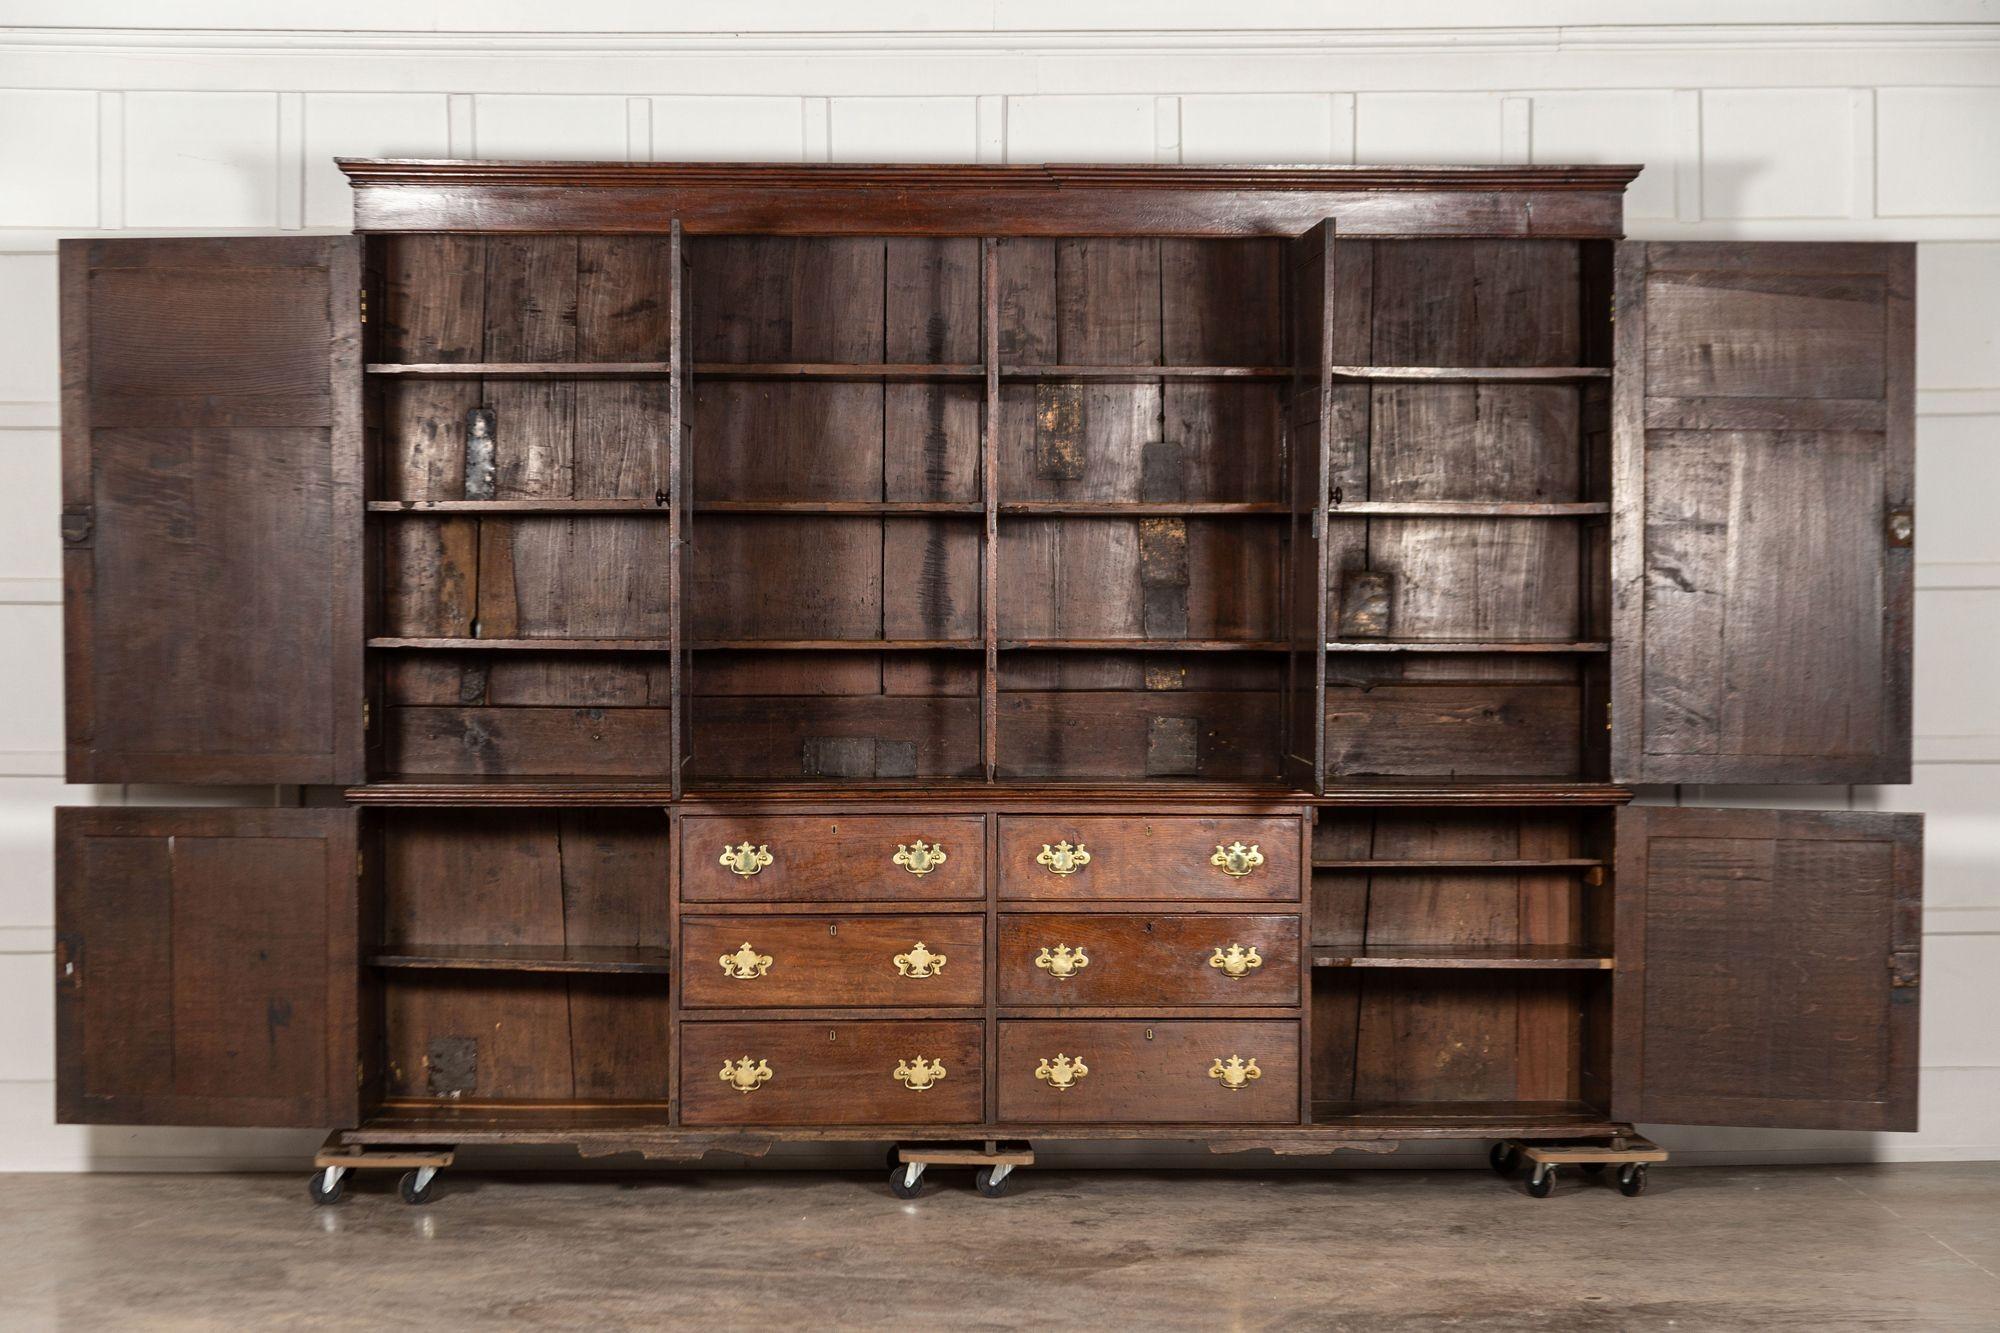 circa 1800
Monumental George III oak housekeeper's cupboard
The narrow ogee cornice above a plain frieze and four cupboard doors with fielded panels, opening to fixed shelves, the base with six graduated drawers flanked by further cupboard doors